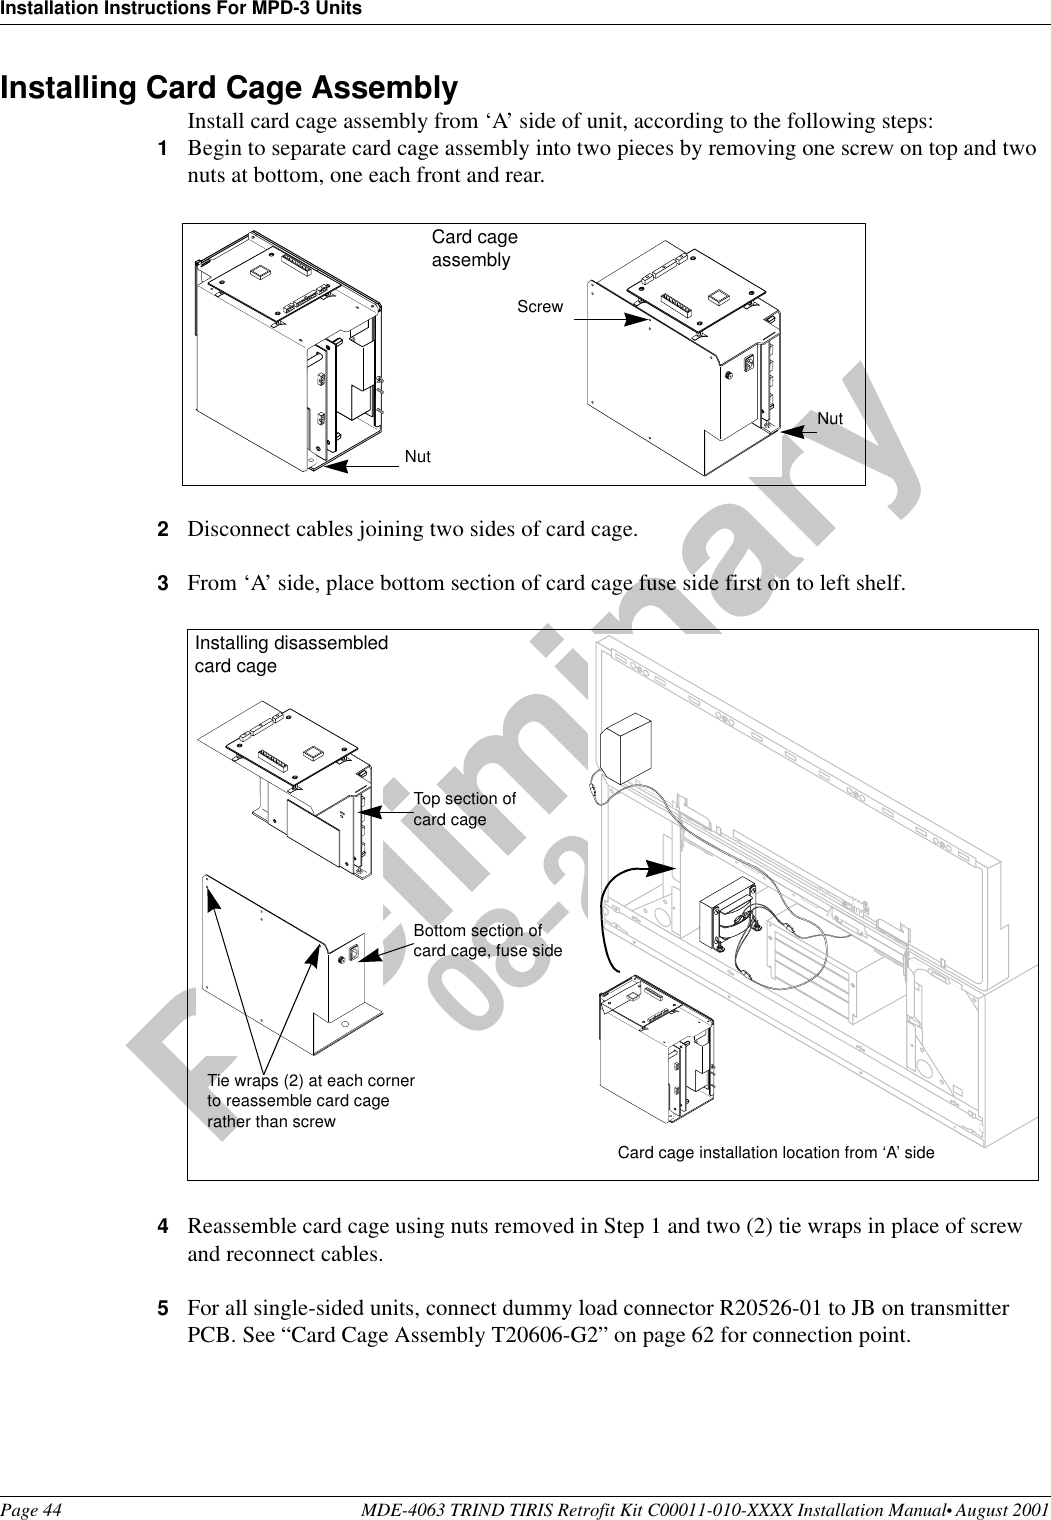 Installation Instructions For MPD-3 UnitsPage 44 MDE-4063 TRIND TIRIS Retrofit Kit C00011-010-XXXX Installation Manual• August 2001Preliminary08-24-01Installing Card Cage AssemblyInstall card cage assembly from ‘A’ side of unit, according to the following steps:1Begin to separate card cage assembly into two pieces by removing one screw on top and two nuts at bottom, one each front and rear.2Disconnect cables joining two sides of card cage.3From ‘A’ side, place bottom section of card cage fuse side first on to left shelf.4Reassemble card cage using nuts removed in Step 1 and two (2) tie wraps in place of screw and reconnect cables.5For all single-sided units, connect dummy load connector R20526-01 to JB on transmitter PCB. See “Card Cage Assembly T20606-G2” on page 62 for connection point.Screw NutNutCard cage assembly++++Installing disassembled card cageCard cage installation location from ‘A’ sideBottom section of card cage, fuse sideTop section of card cage Tie wraps (2) at each corner to reassemble card cage rather than screw